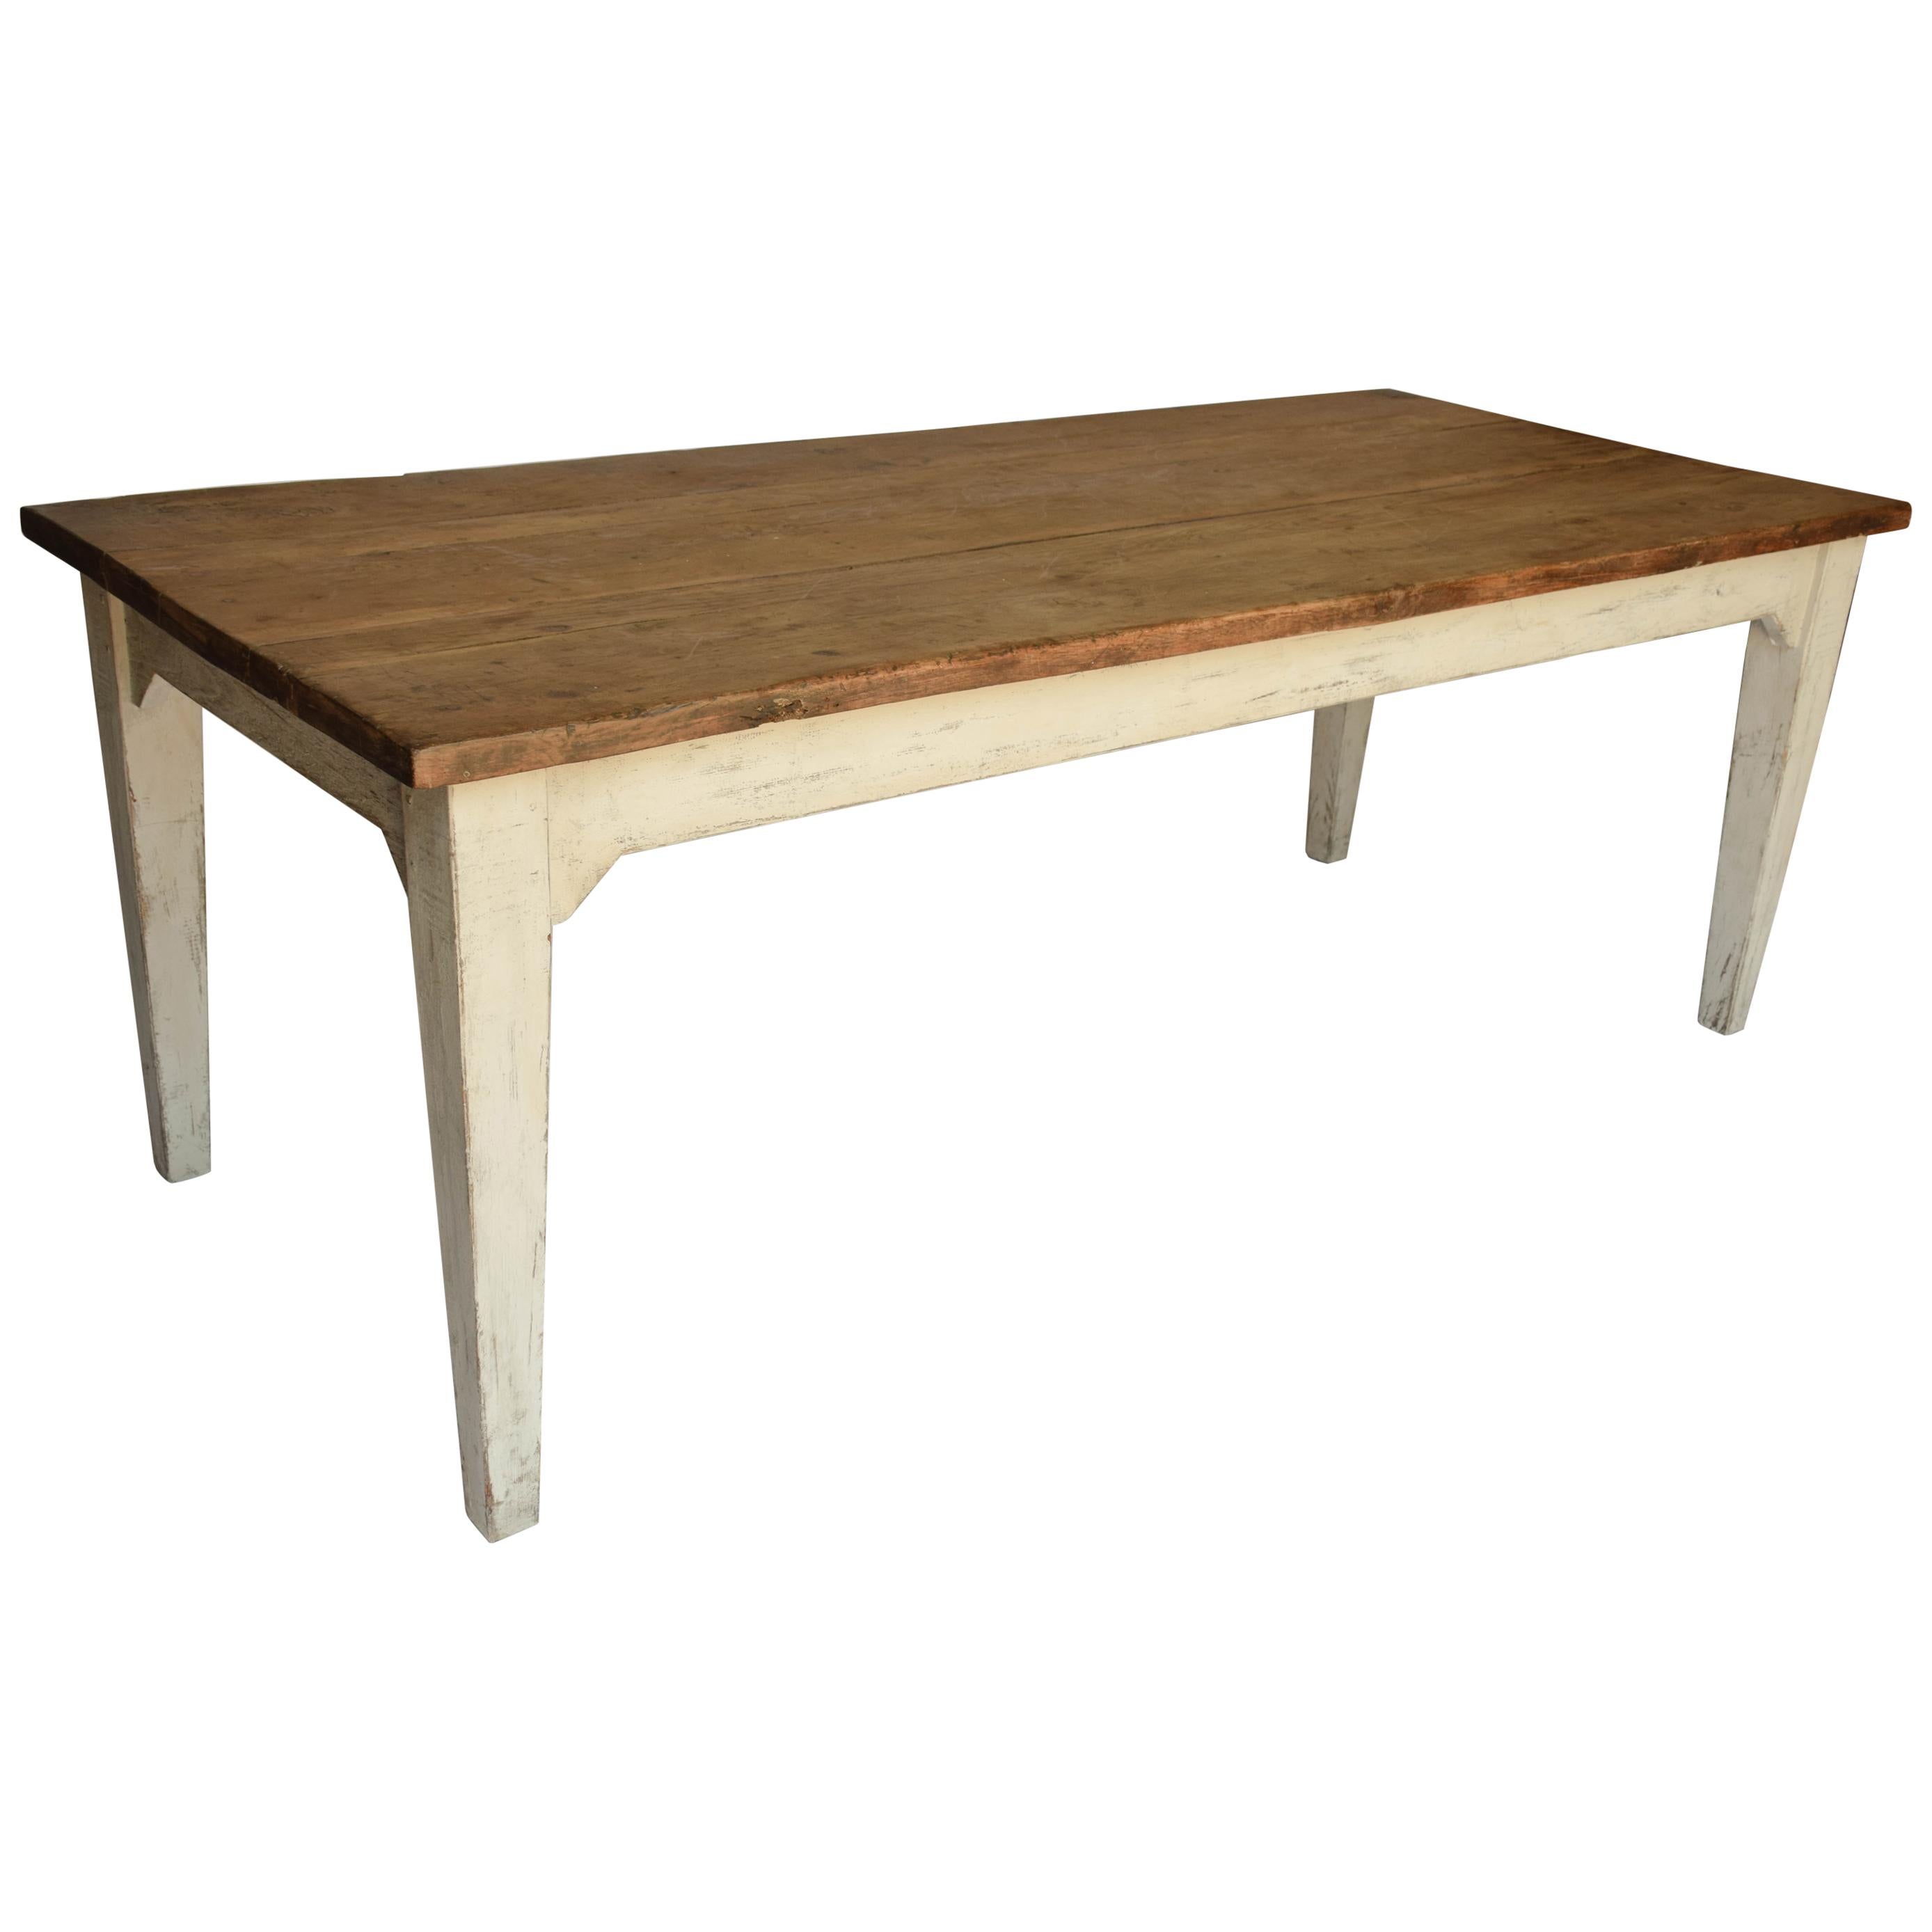 French Provencial Farm Table